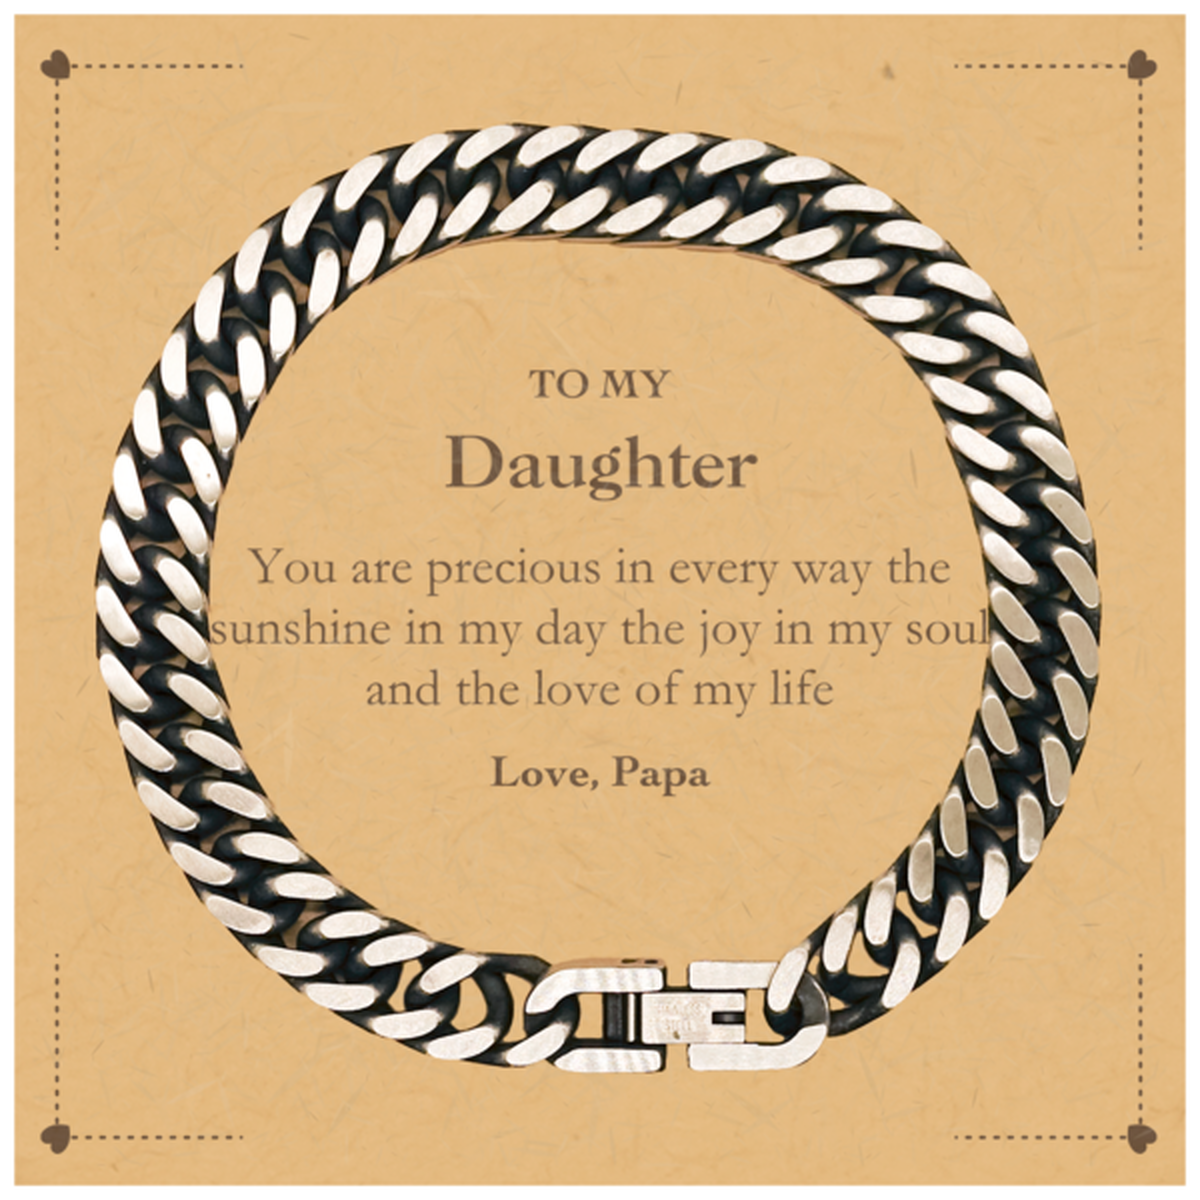 Graduation Gifts for Daughter Cuban Link Chain Bracelet Present from Papa, Christmas Daughter Birthday Gifts Daughter You are precious in every way the sunshine in my day. Love, Papa